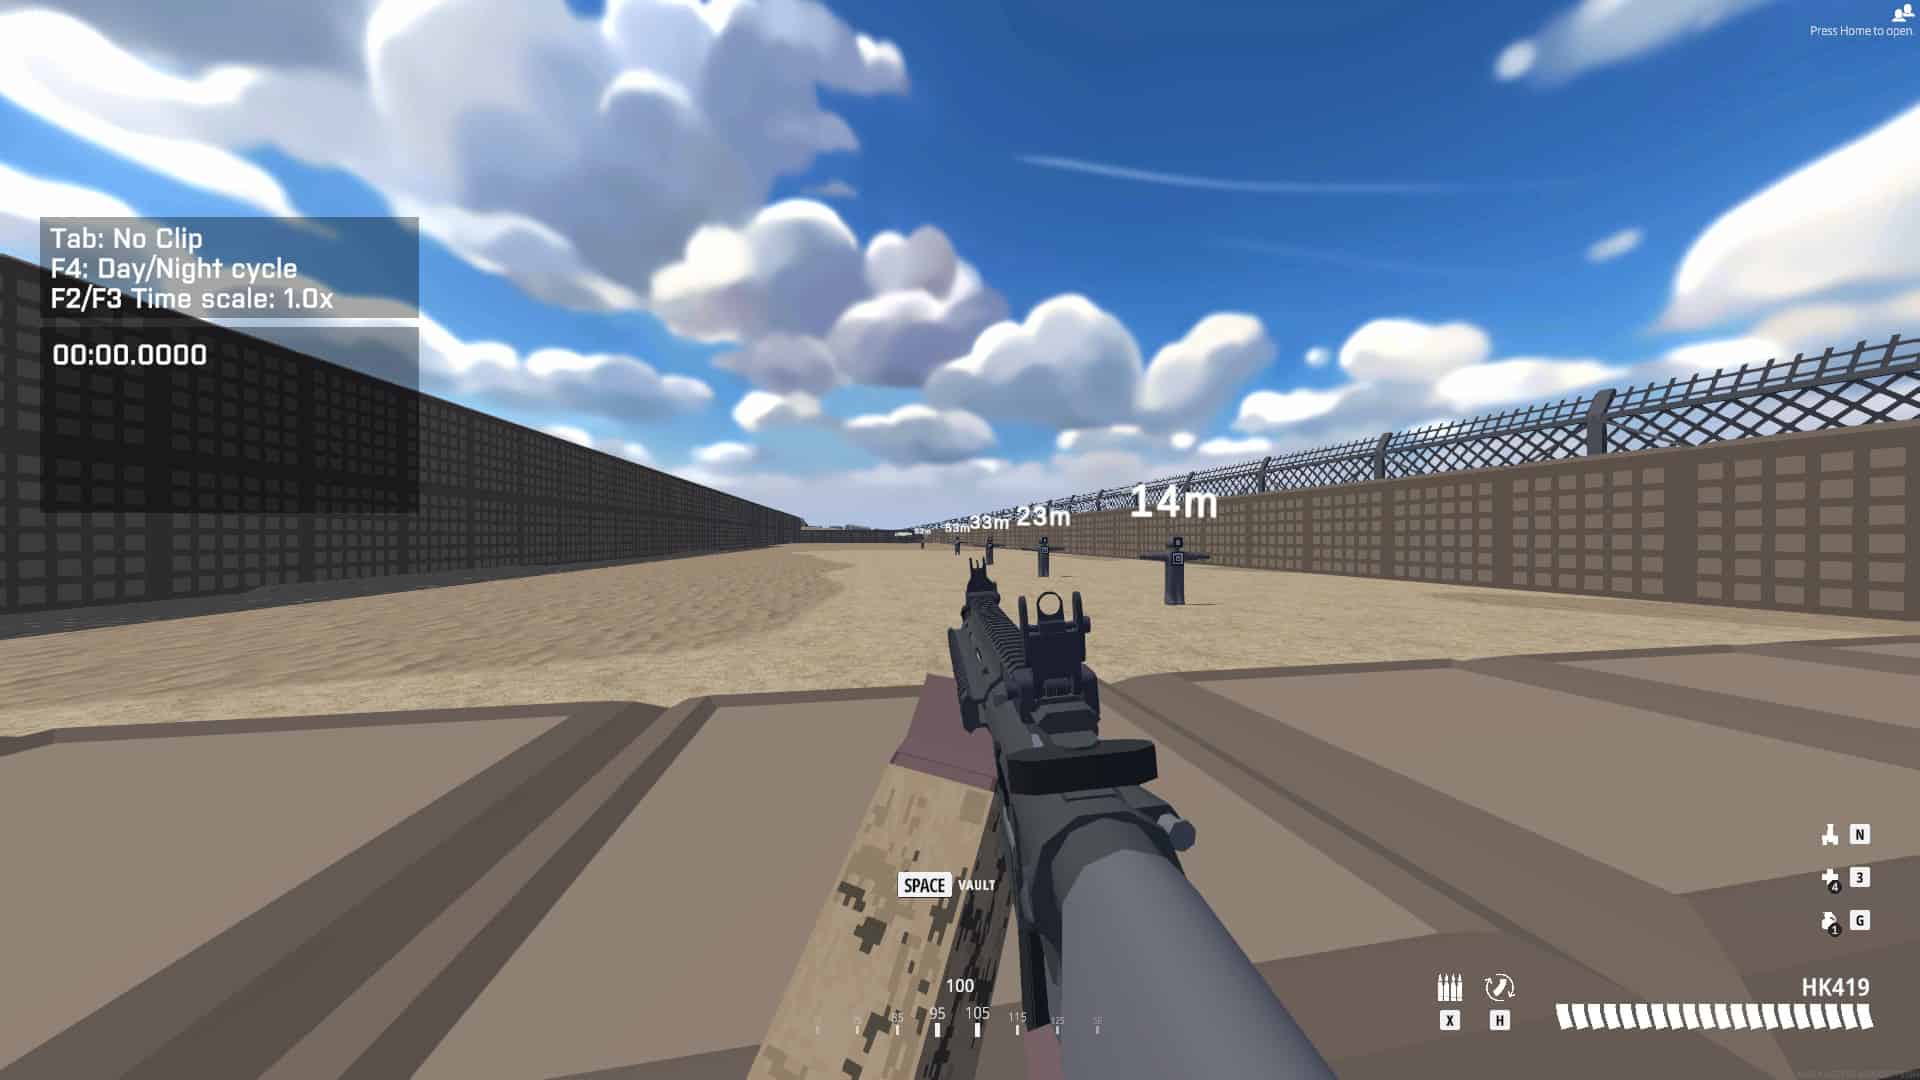 BattleBit Remastered best weapons: An image of the HK419 weapon used in a training range in BattleBit Remastered.